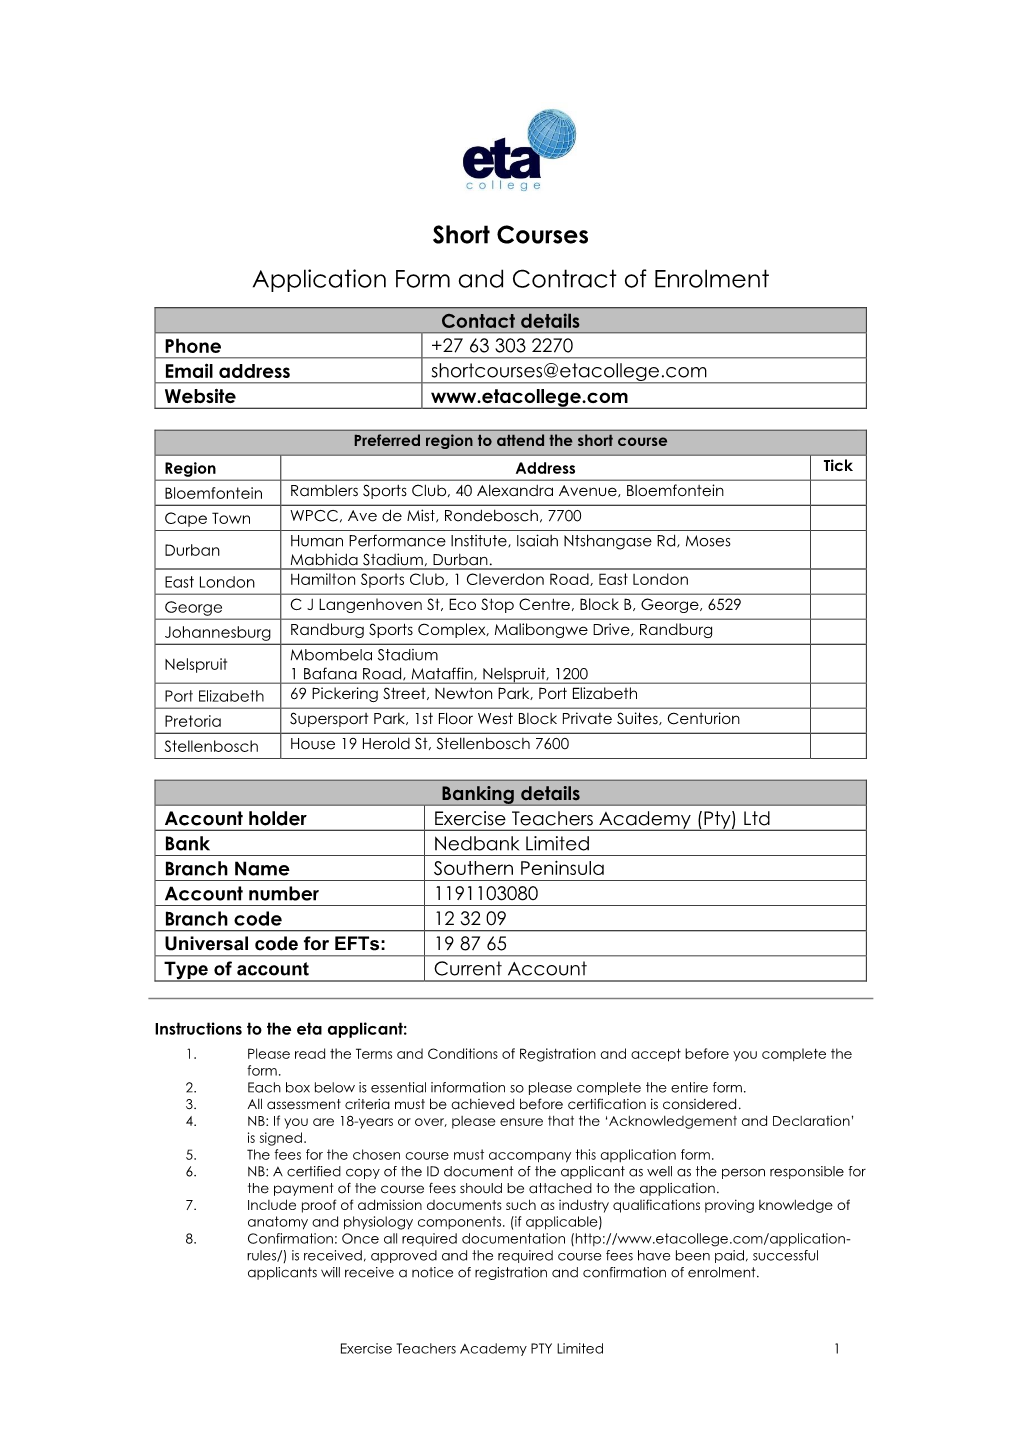 Short Courses Application Form and Contract of Enrolment